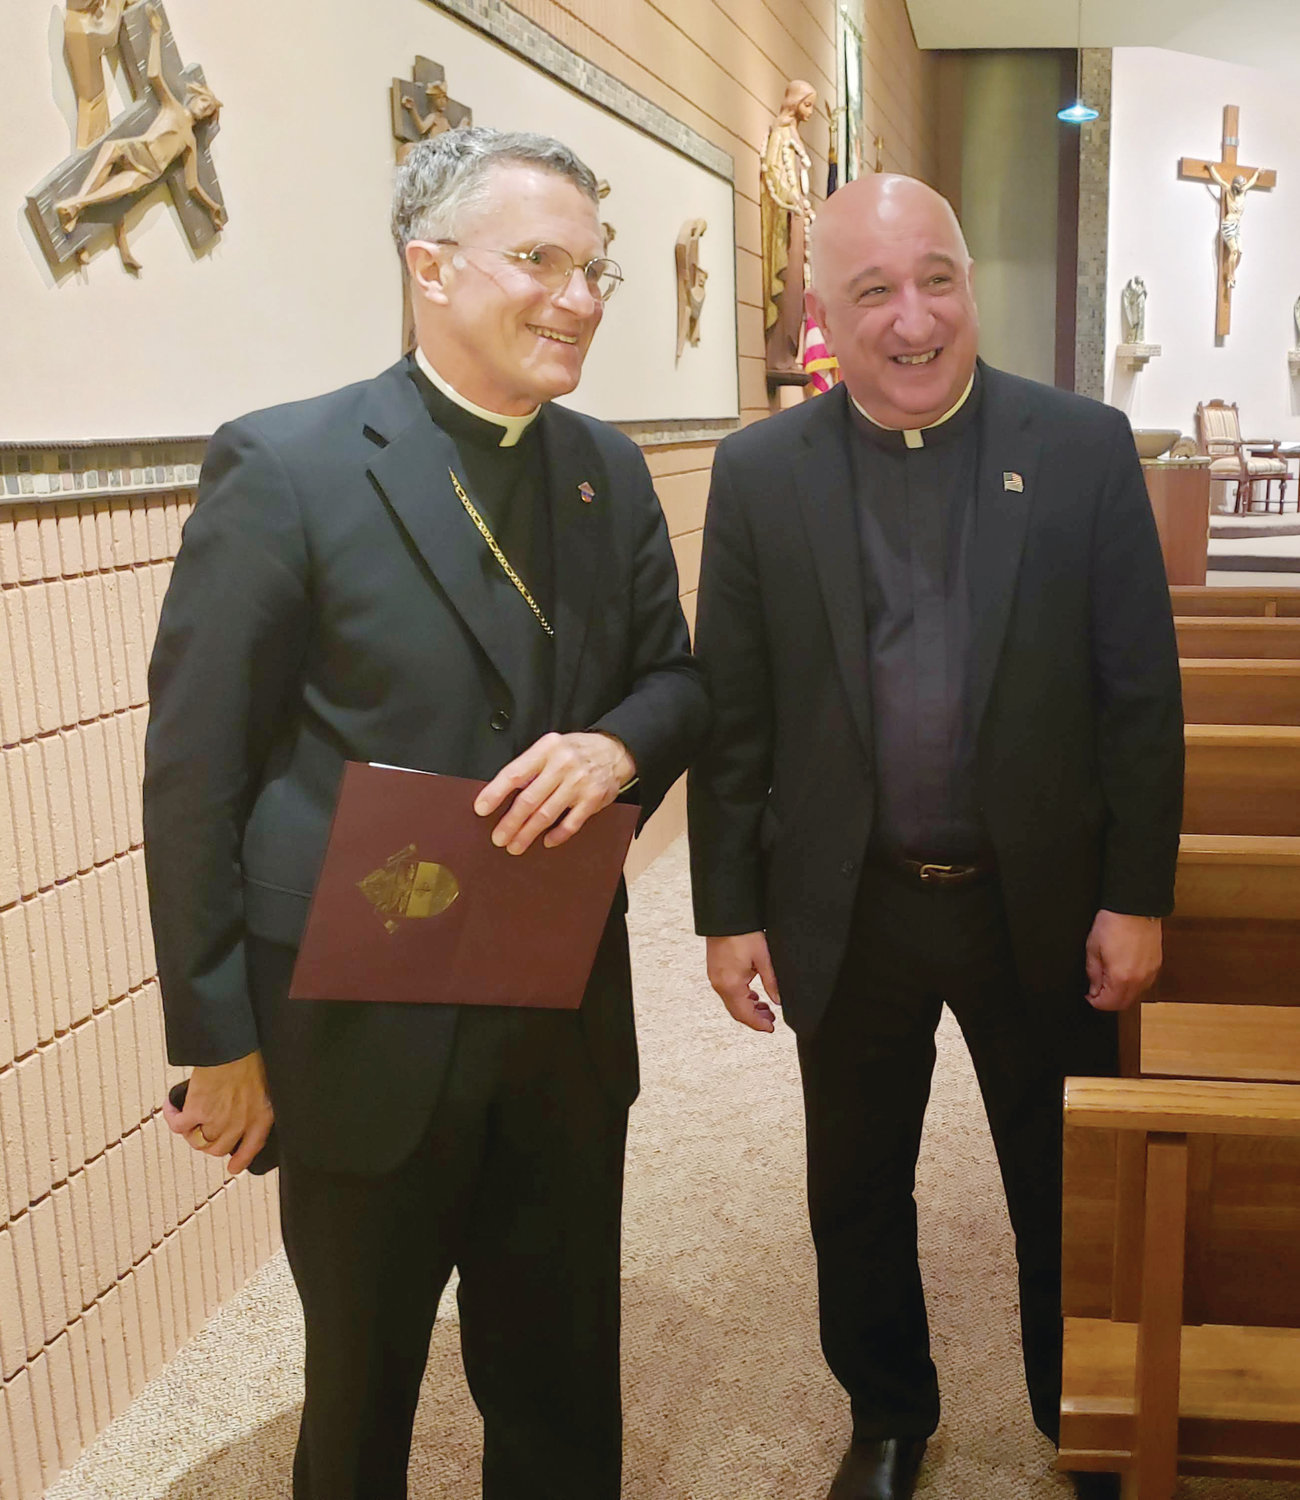 Archbishop Timothy Broglio, left, shepherd of the Archdiocese for the Military Sevices, USA, and Father Robert Marciano, former U.S. Air National Guard chaplain and now pastor of St. Kevin and St. Benedict Parish, Warwick, and president of Bishop Hendricken, gather for a Catholic Schools retreat on Aug. 30.